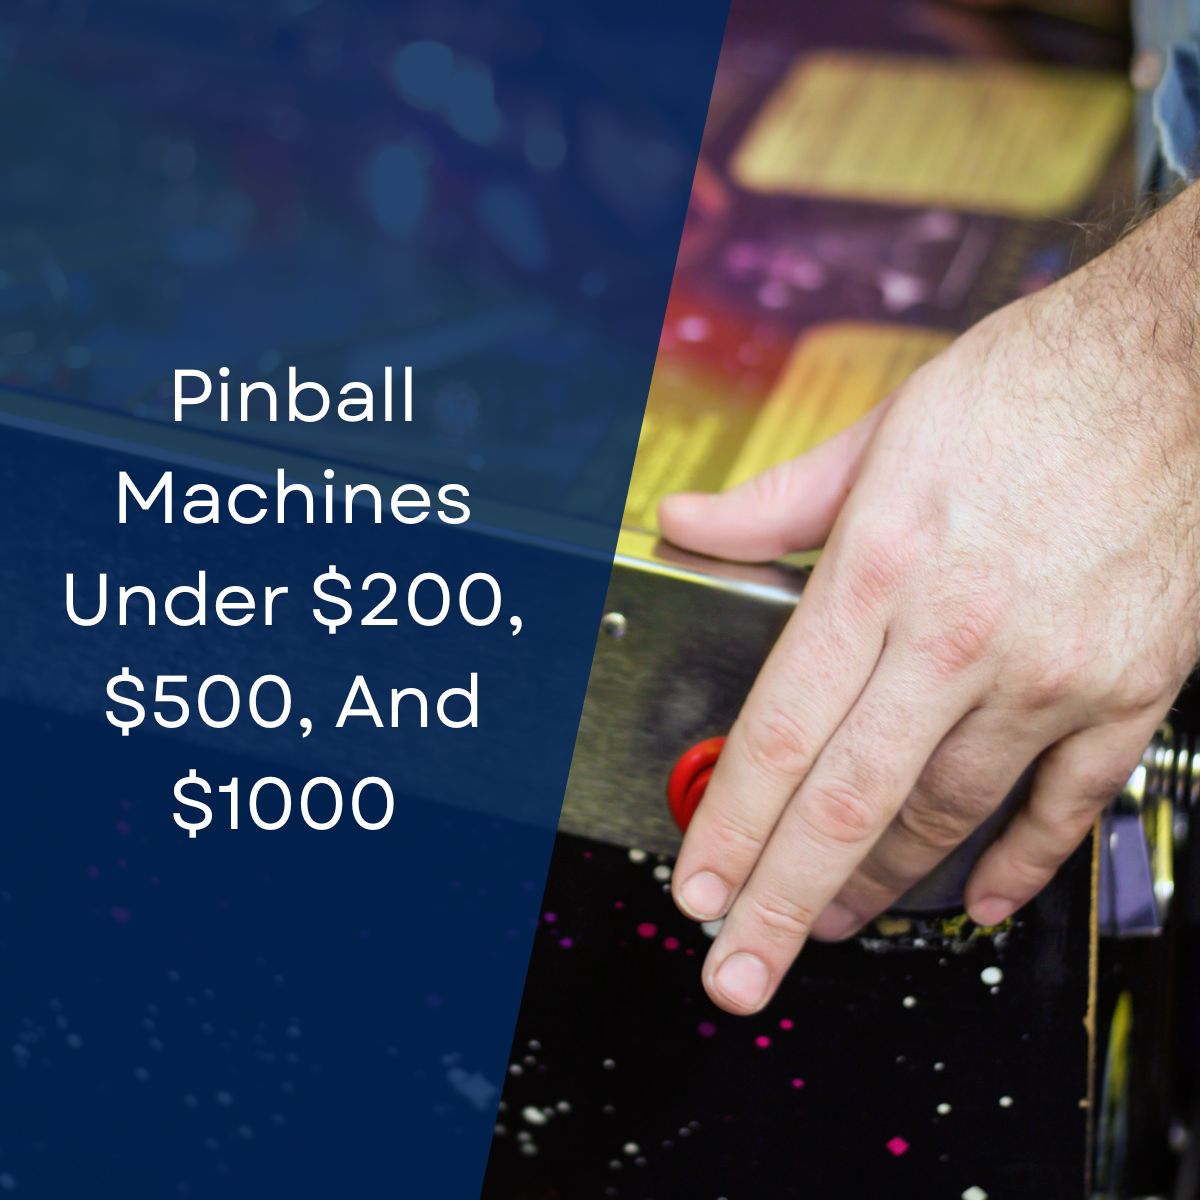 Pinball Machines Under $200, $500, And $1000 (Best Cheap & Affordable Machines)